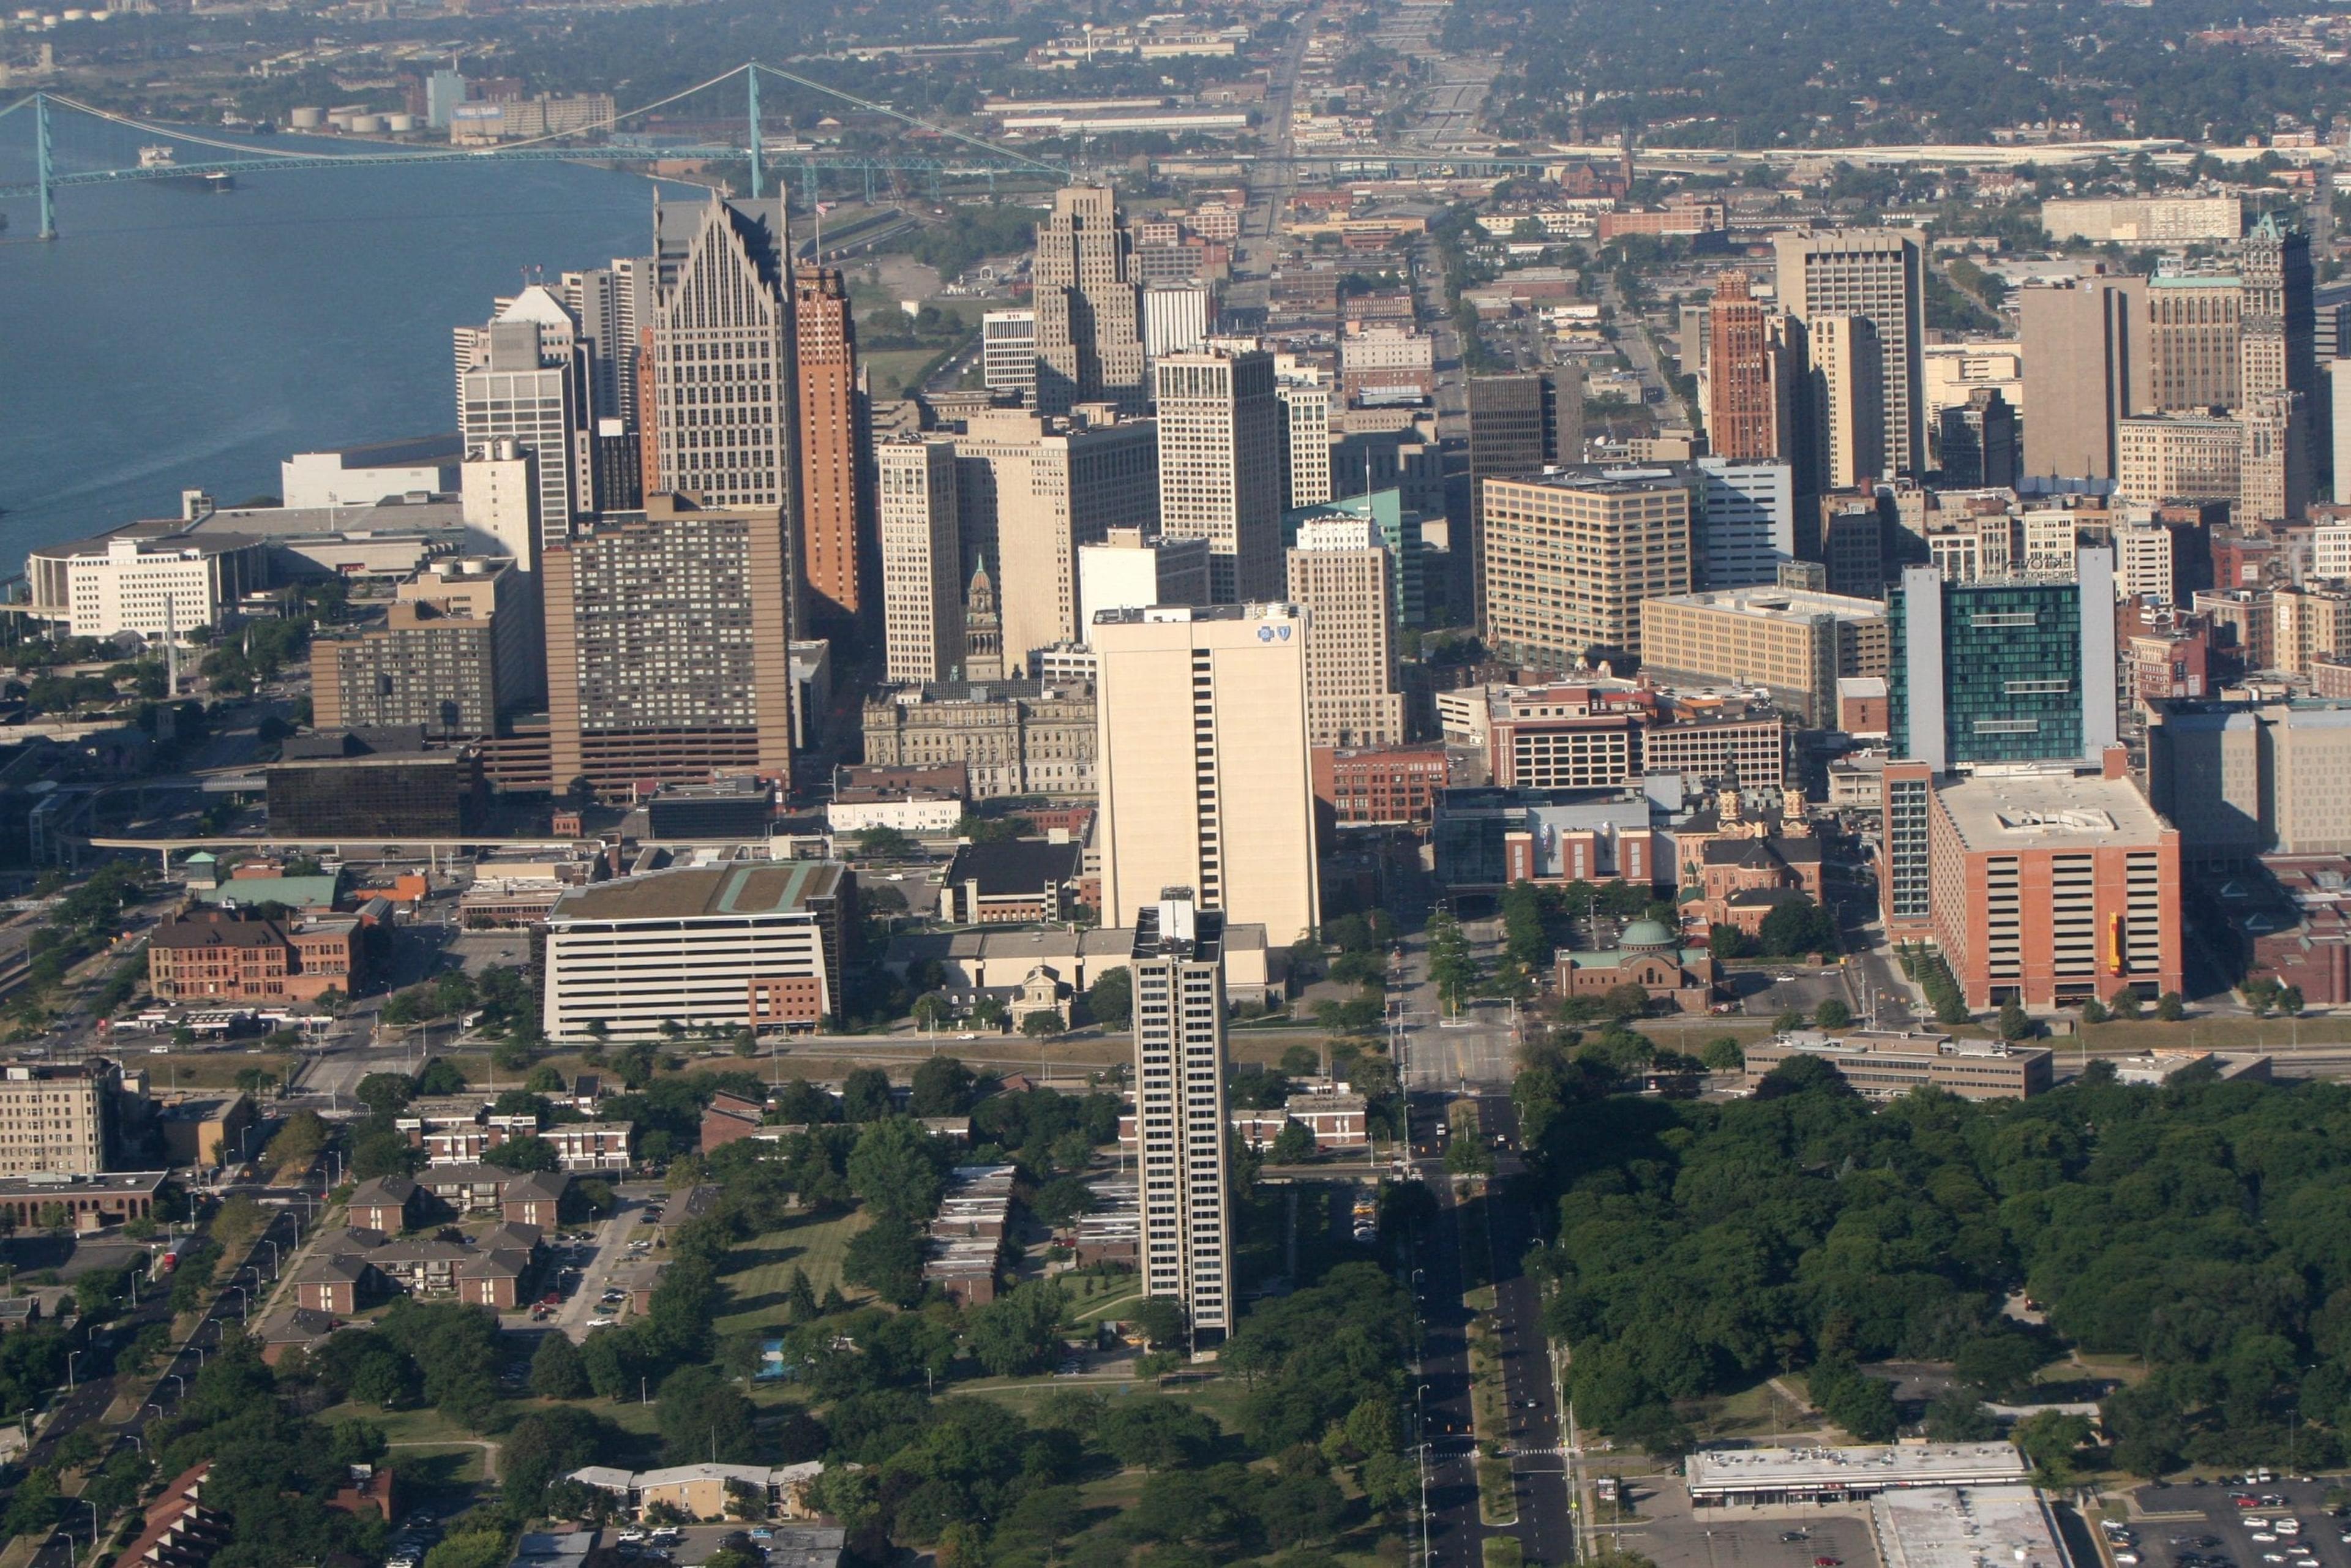 Detroit skyline with Blue Cross tower in center